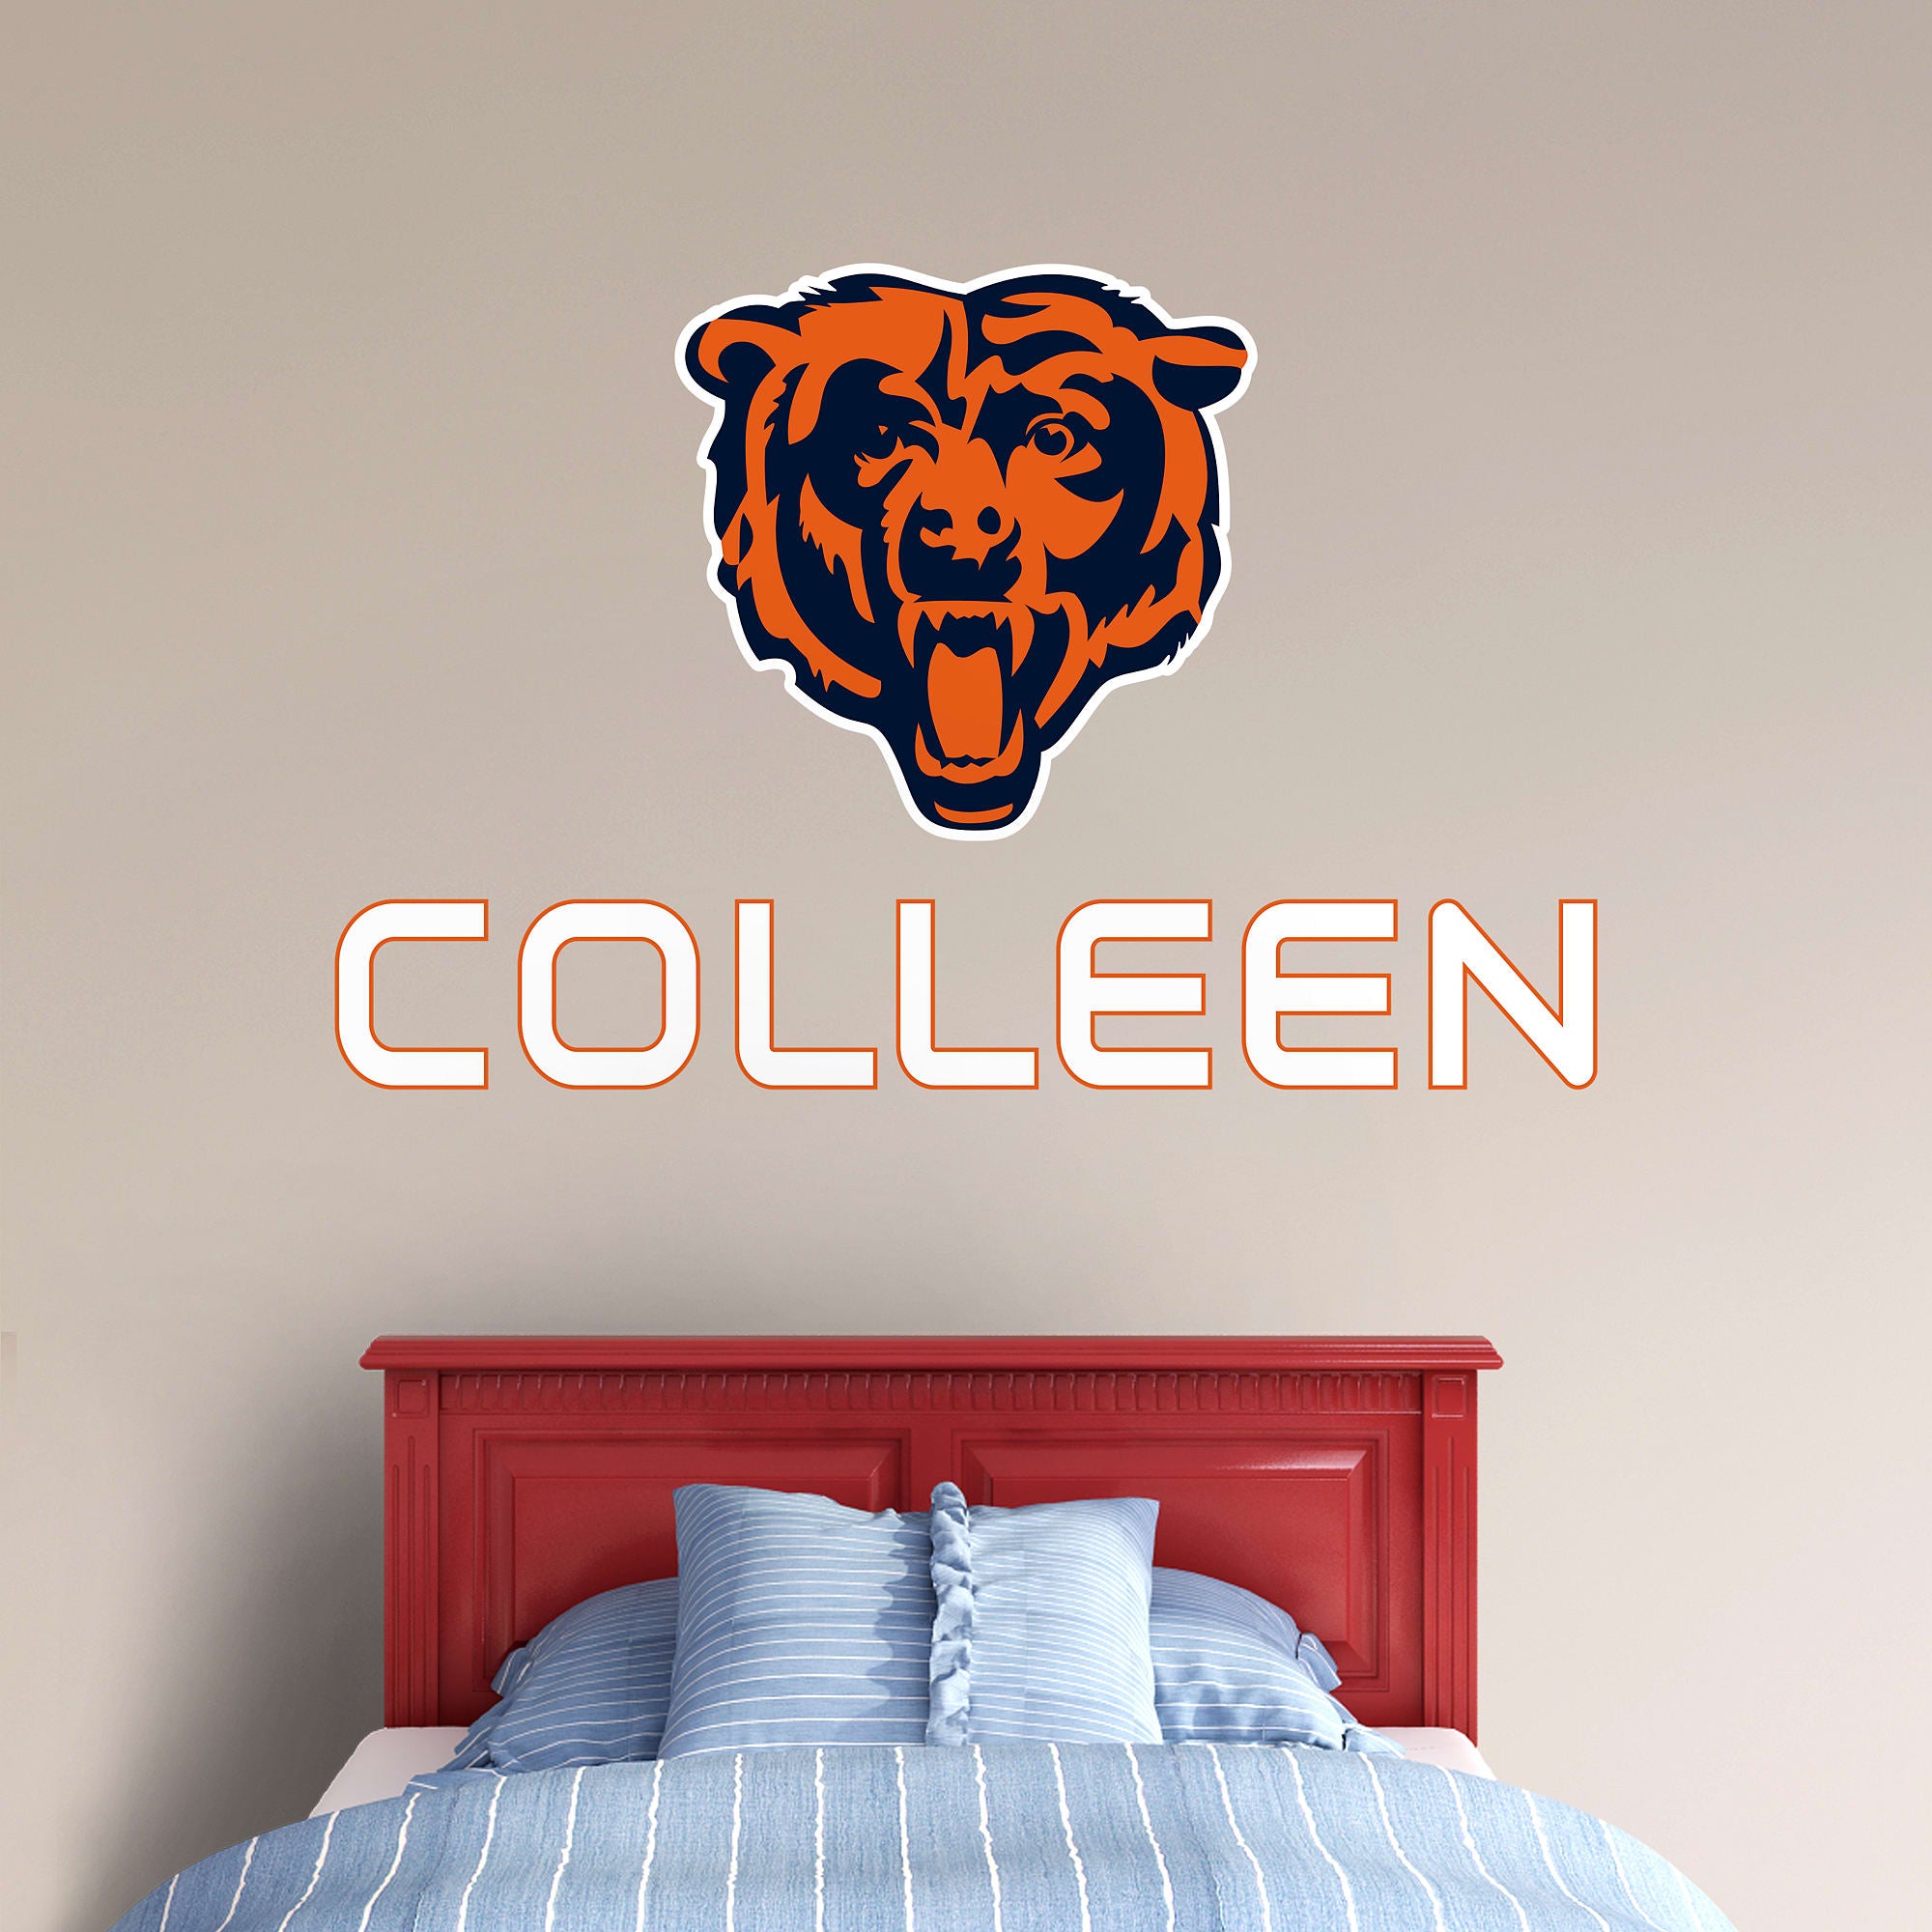 Chicago Bears: Bear Logo Stacked Personalized Name - Officially Licensed NFL Transfer Decal in White (52"W x 39.5"H) by Fathead